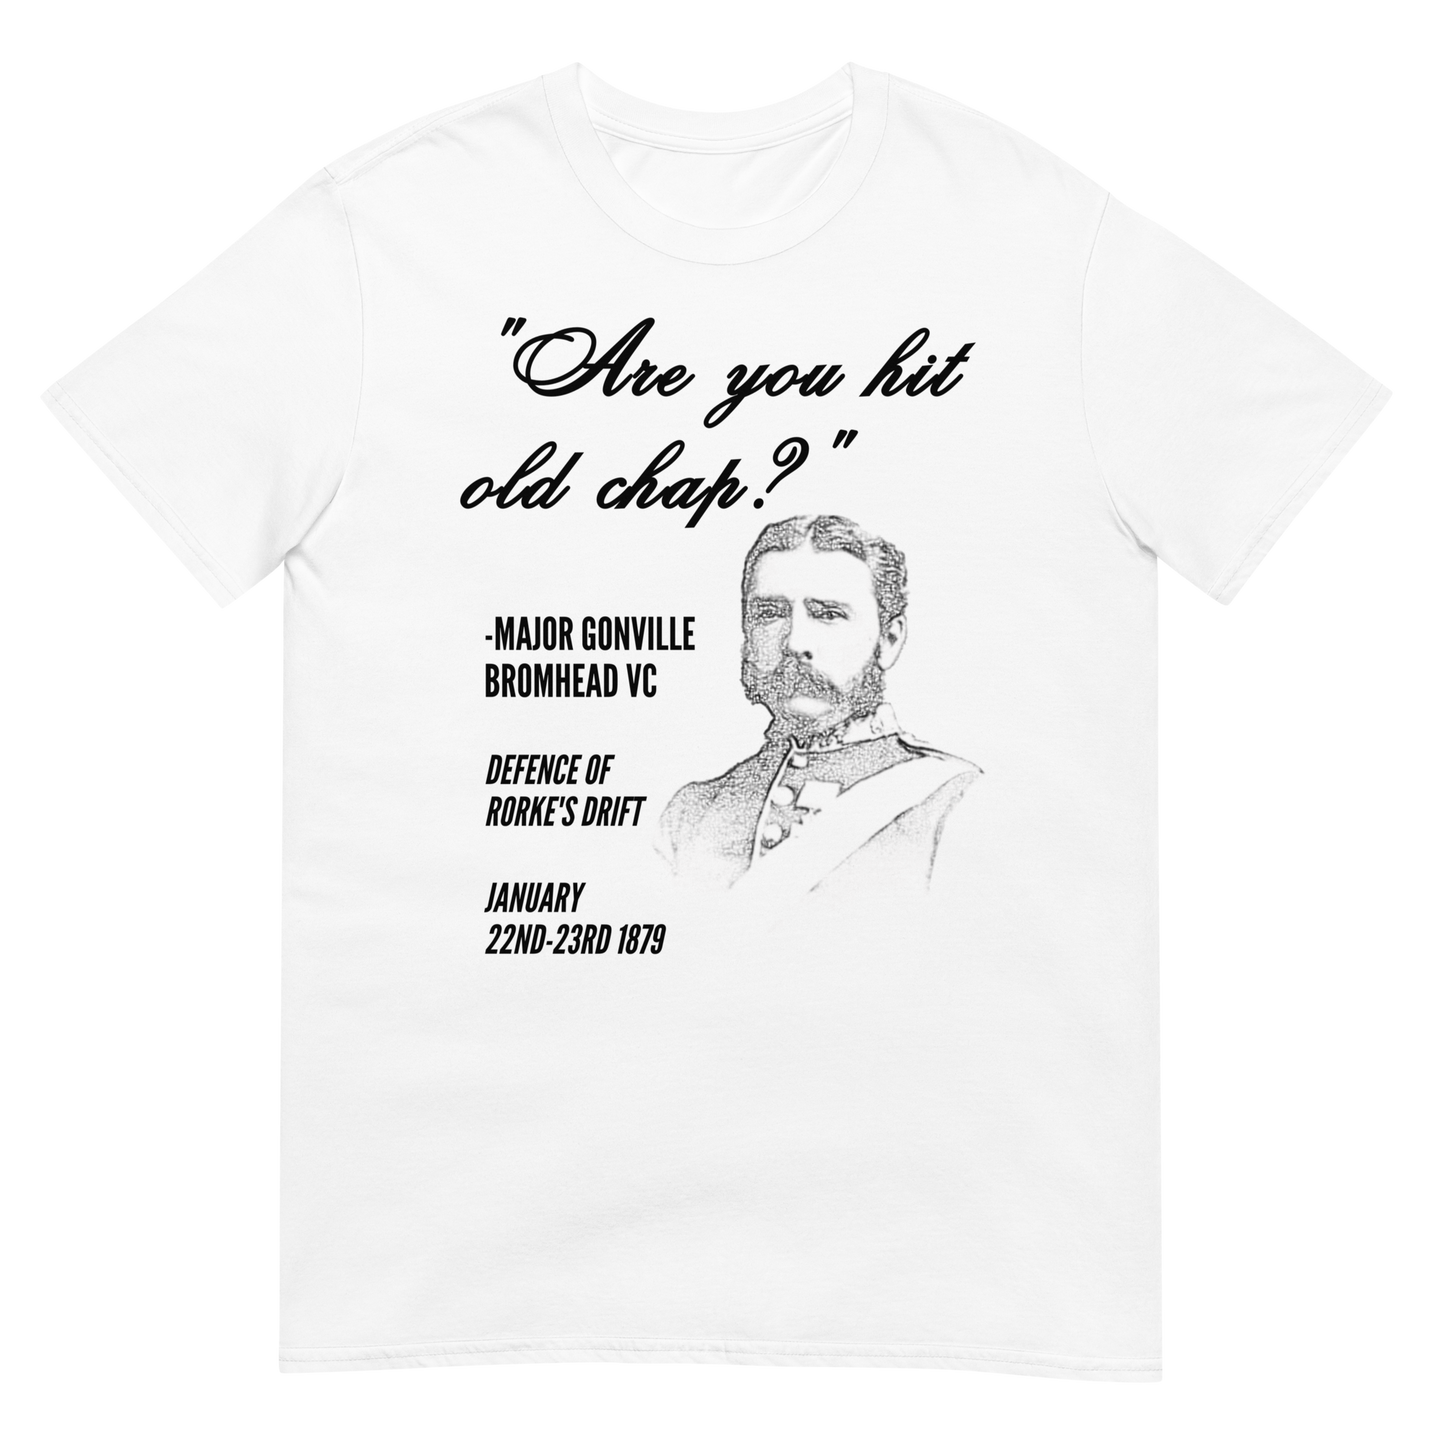 "Are You Hit Old Chap?" - Bromhead (t-shirt)